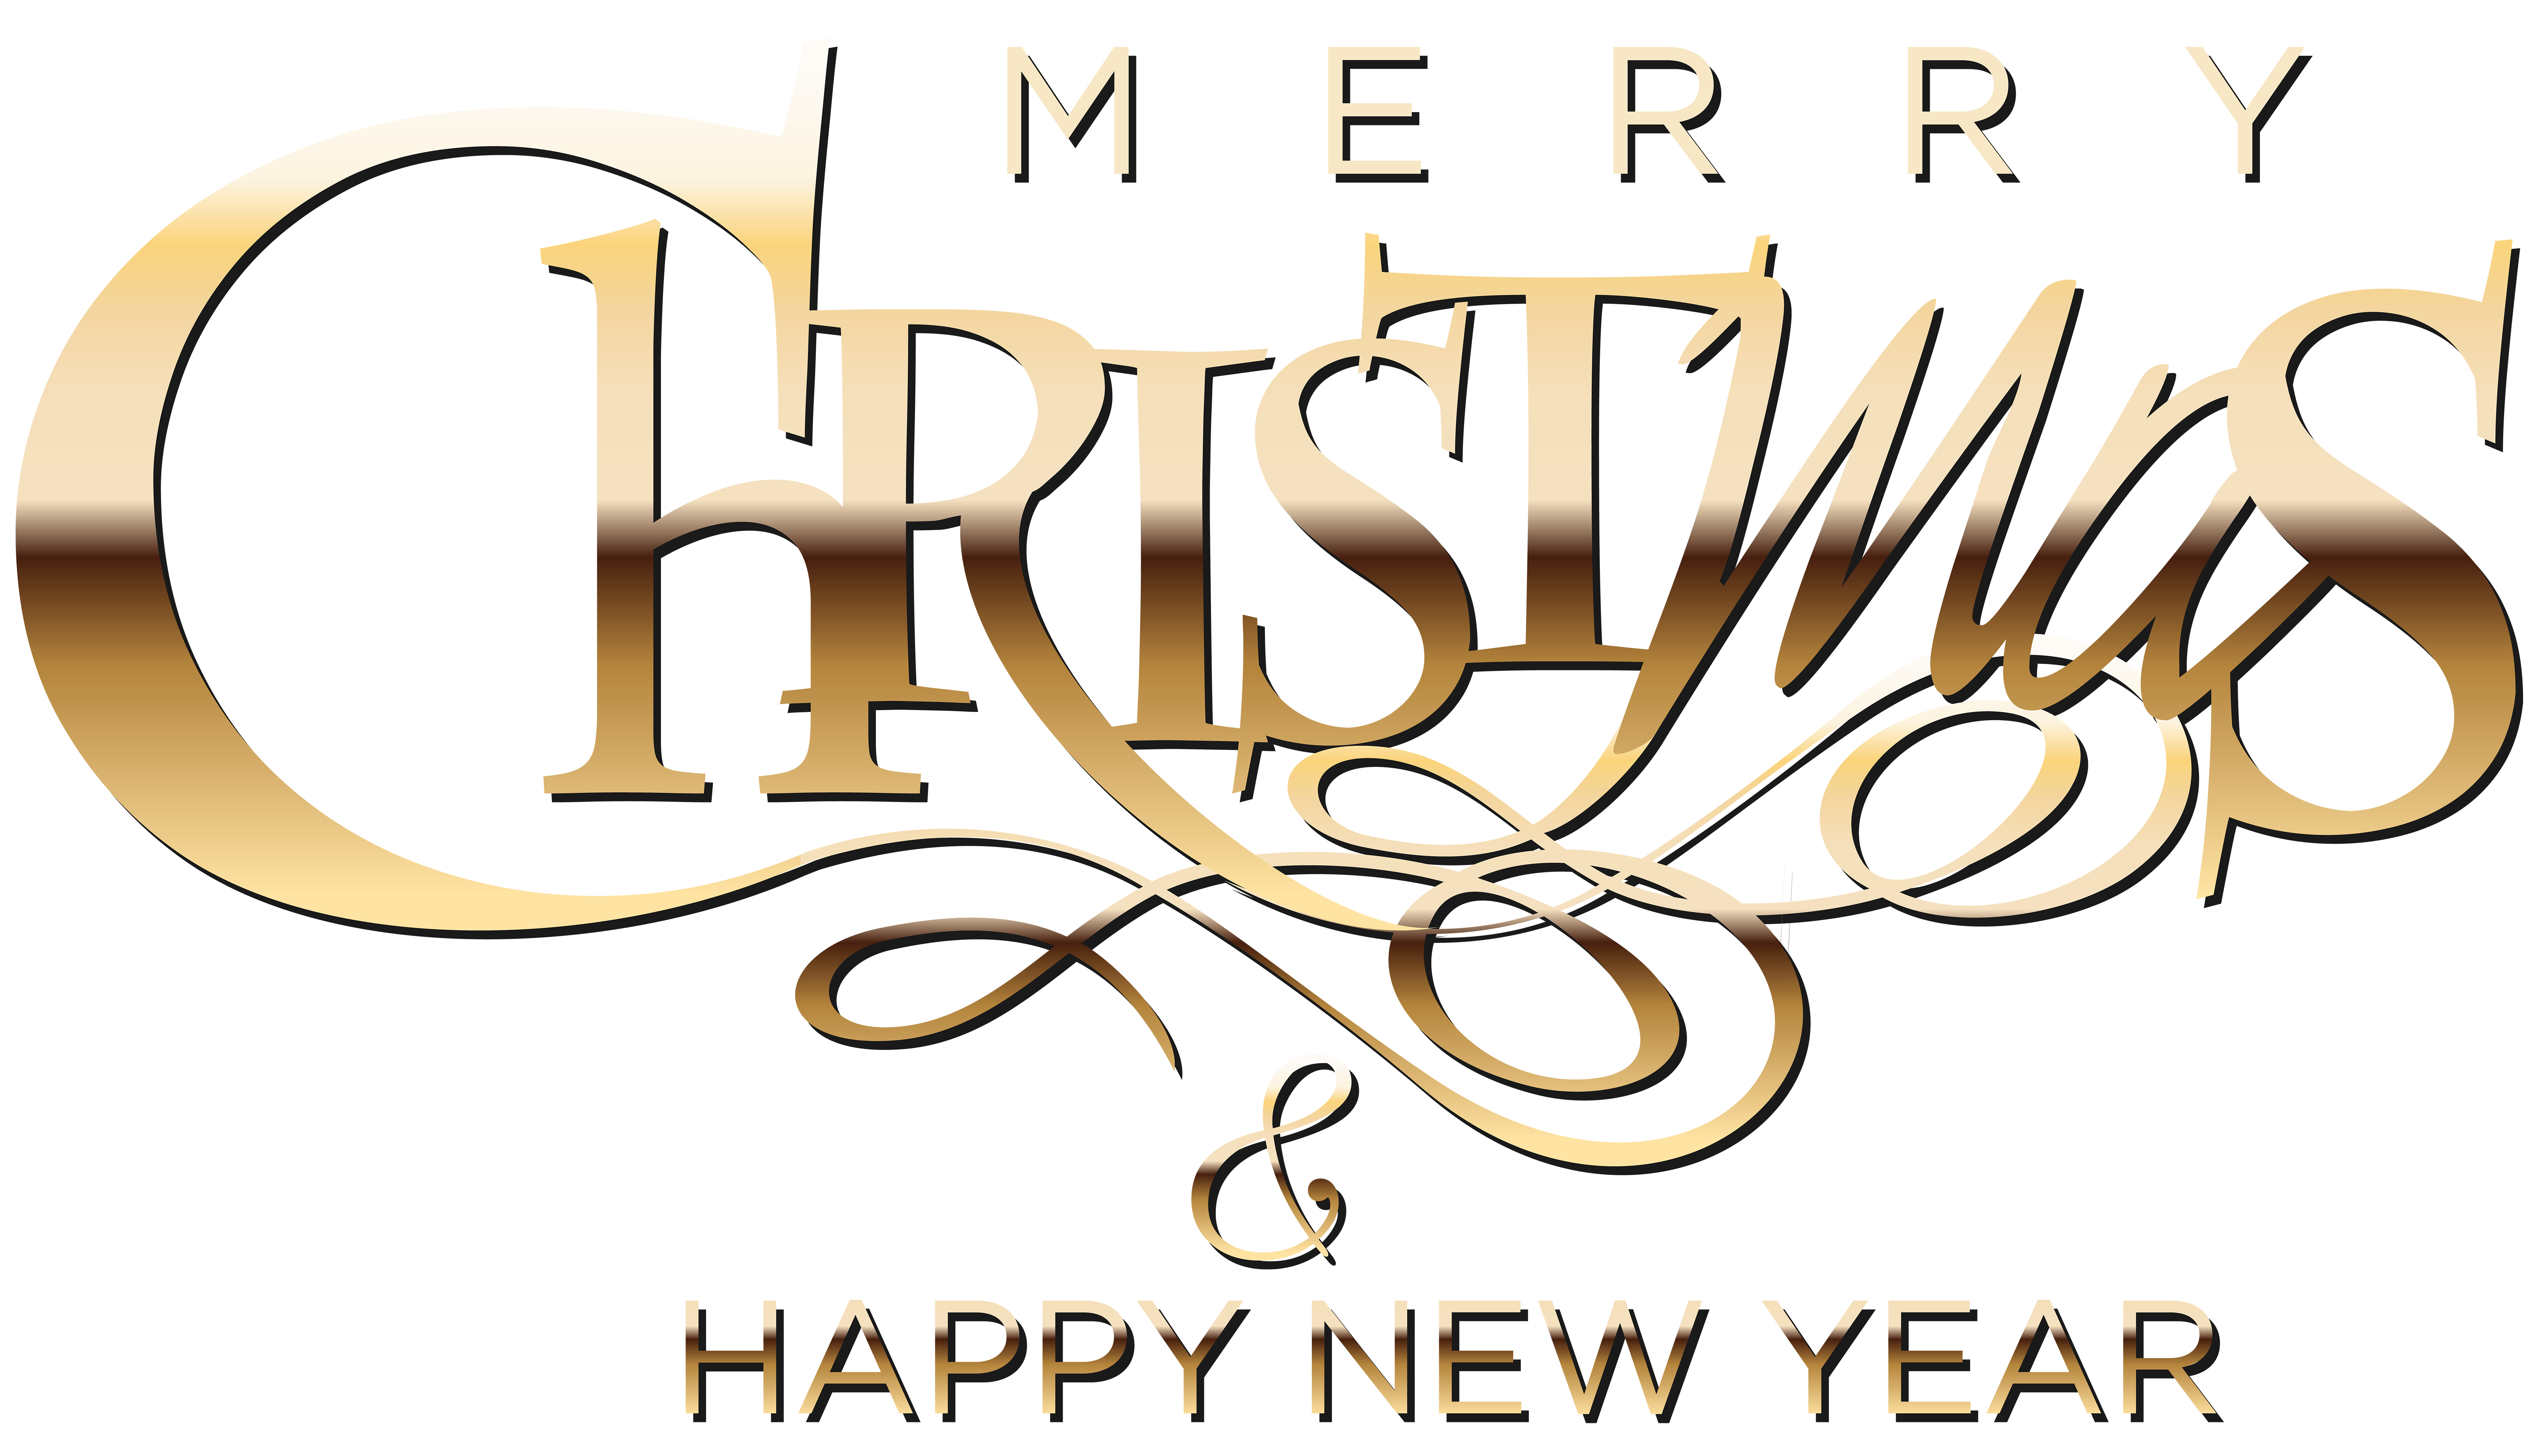 merry-christmas-and-happy-new-year-clip-art-image-gallery-yopriceville-high-quality-free